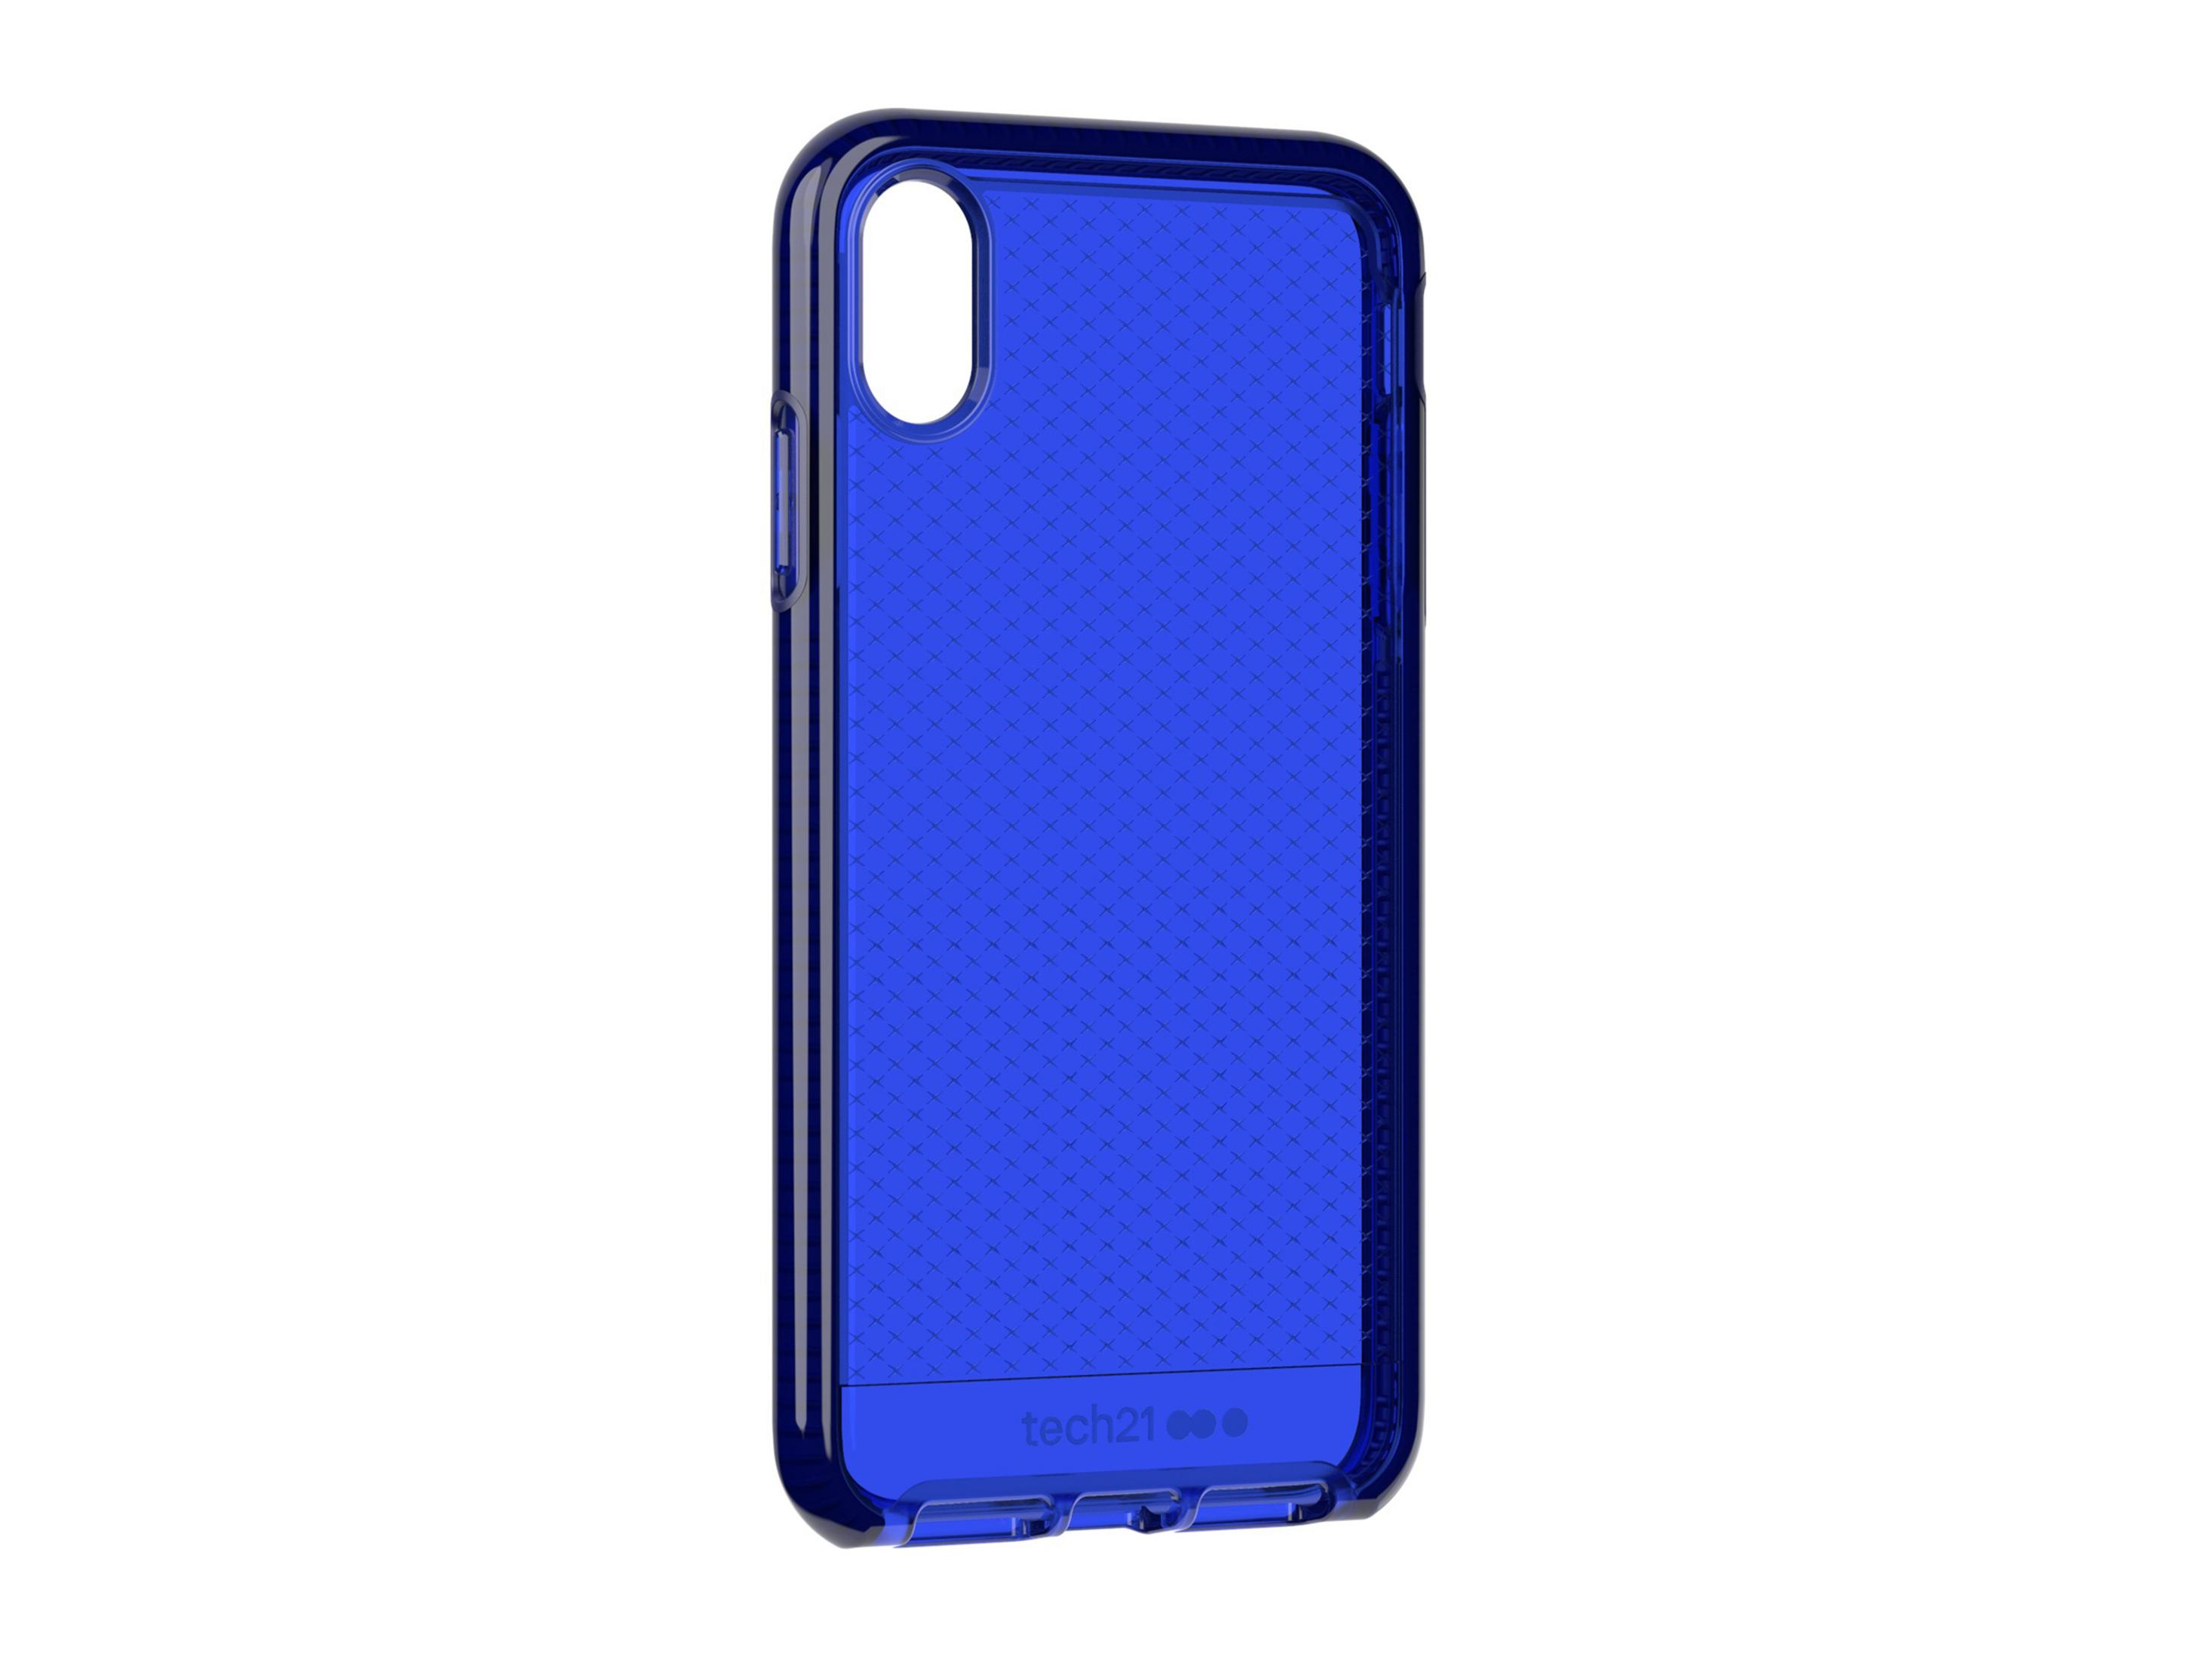 TECH21 T21-6542 EVO CHECK FOR IPHONE BLU, Blau iPhone MIDNIGHT XS Apple, Max, Backcover, MAX XS